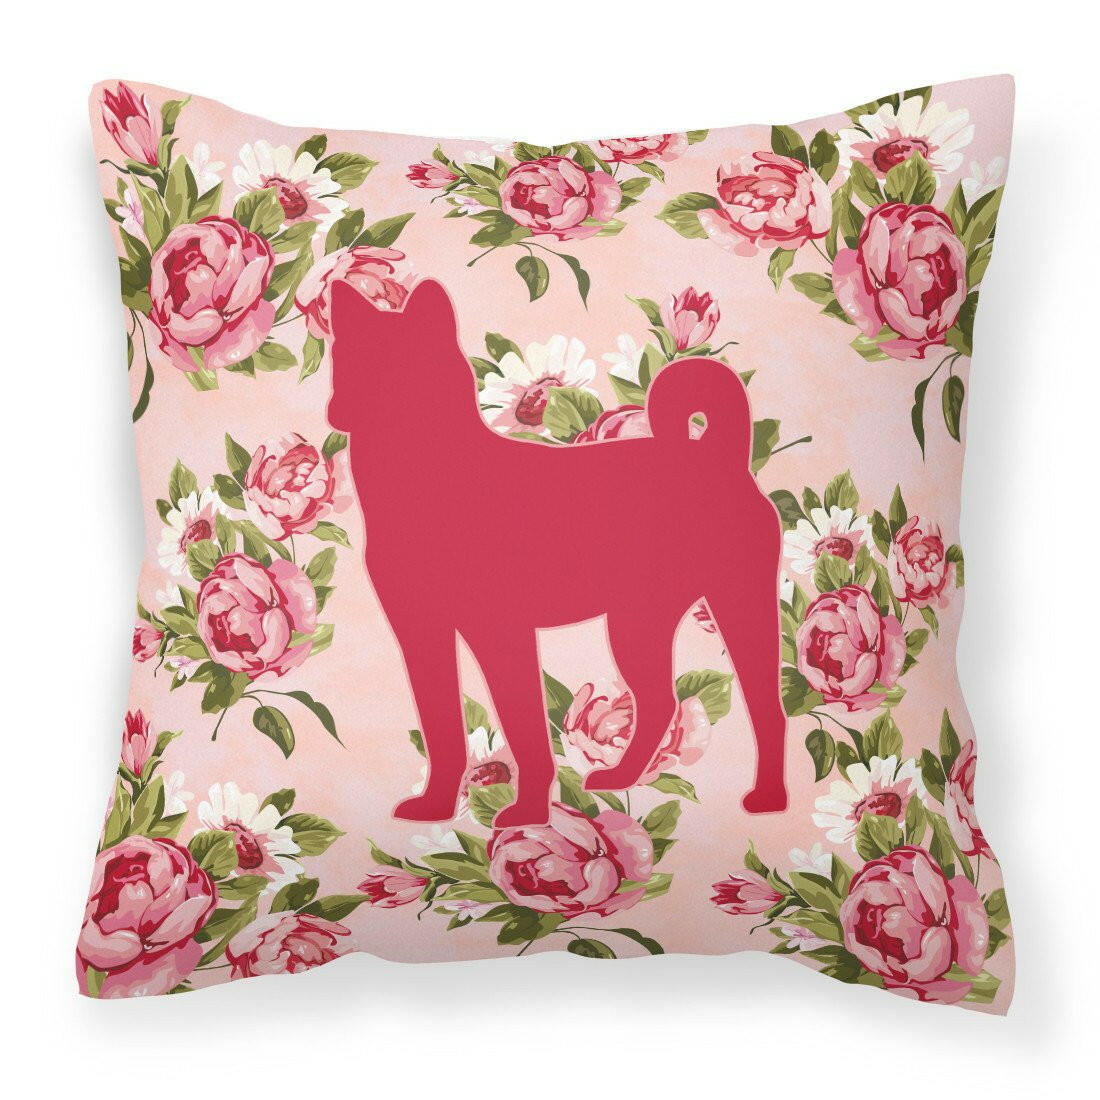 Basenji Shabby Chic Pink Roses  Fabric Decorative Pillow BB1110-RS-PK-PW1414 - the-store.com